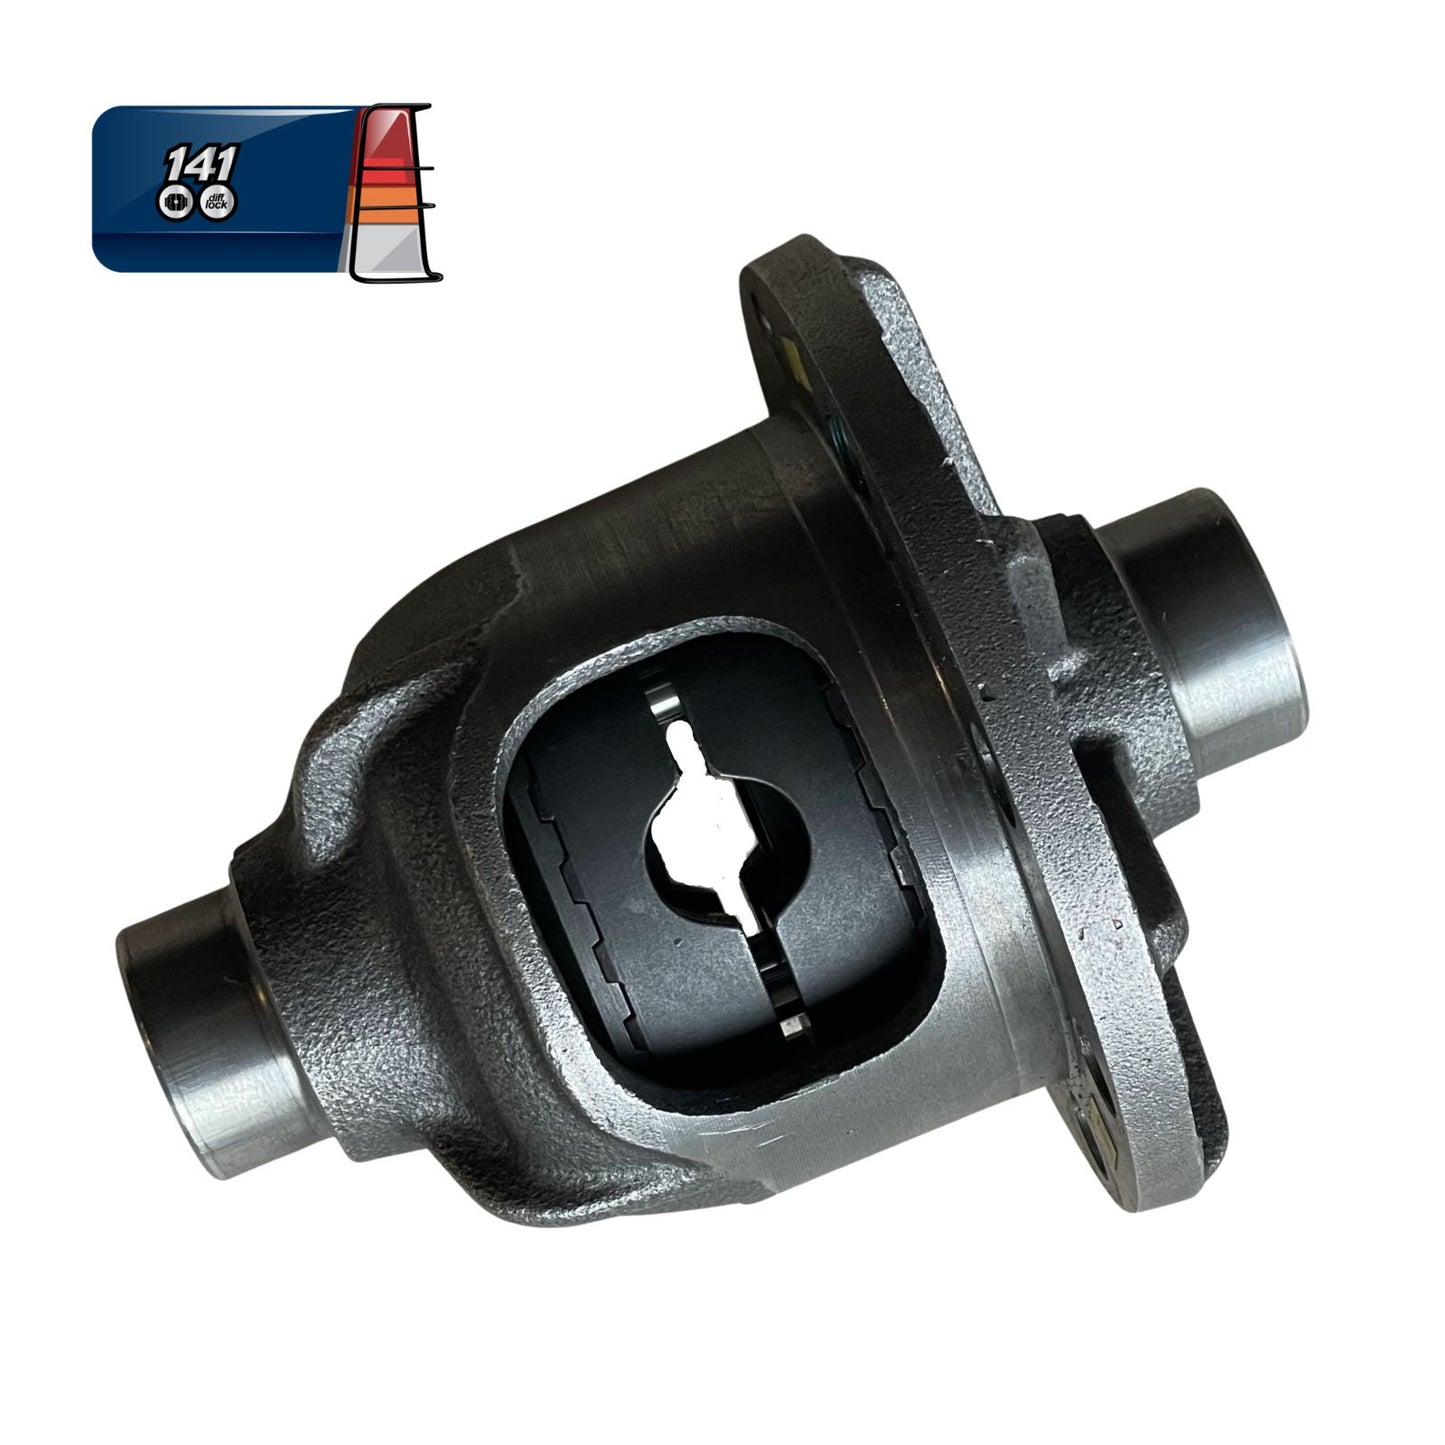 Automatic rear differential lock for Fiat Panda I 4x4 and Lancia/Autobianchi Y10 4WD